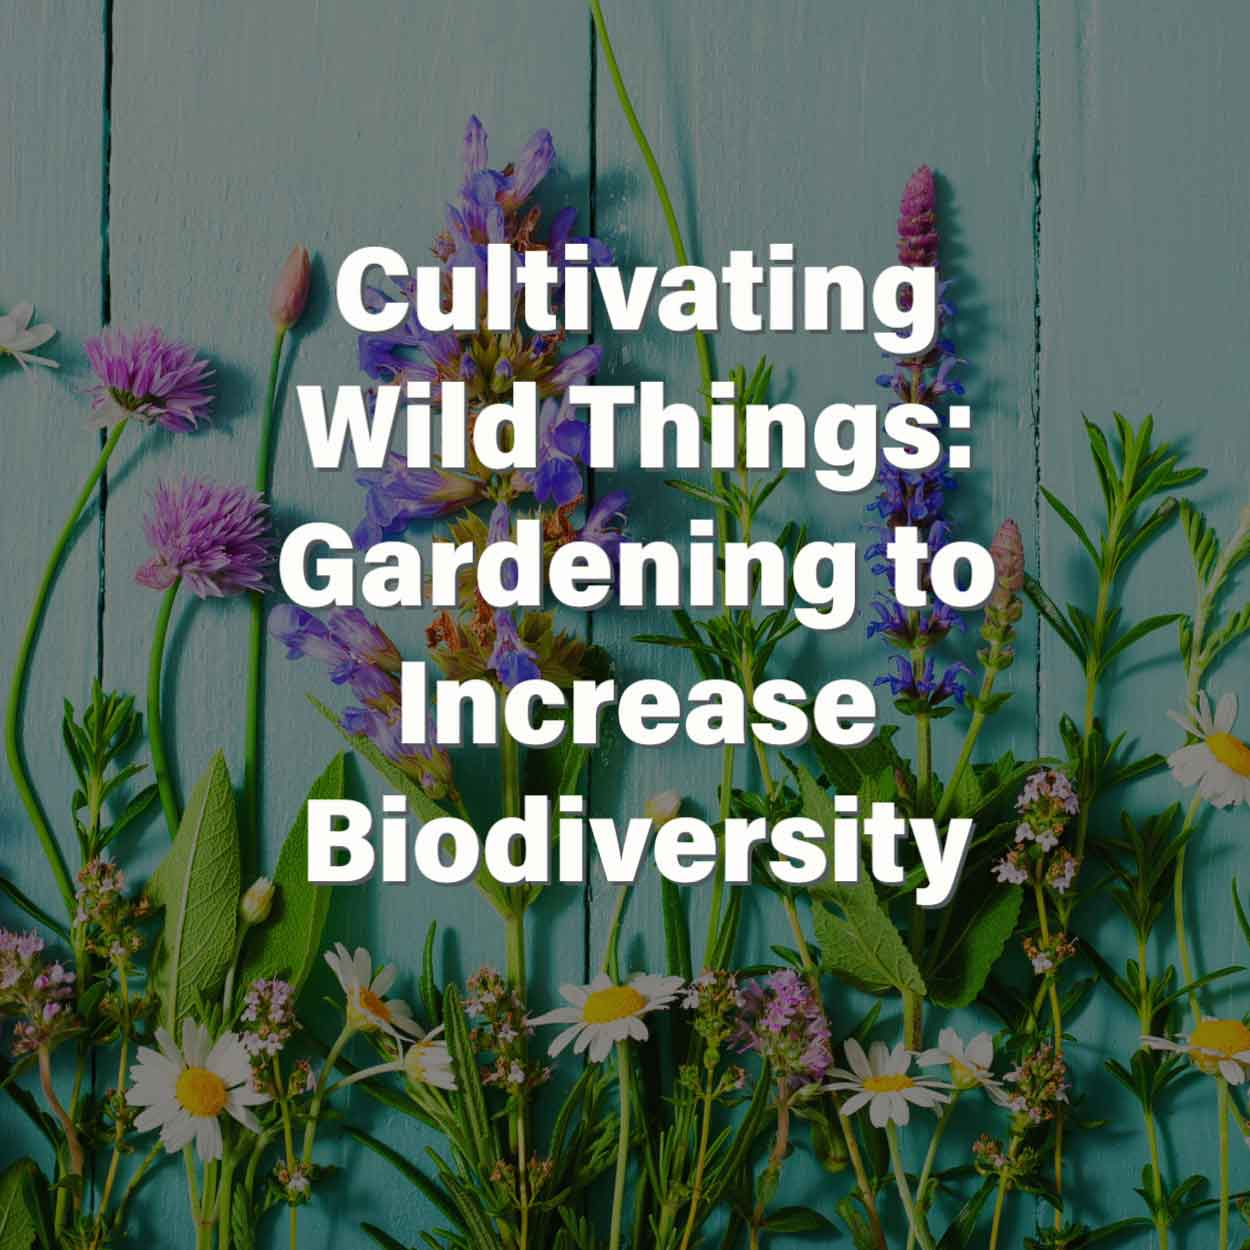 Cultivating Wild Things: Gardening to Increase Biodiversity